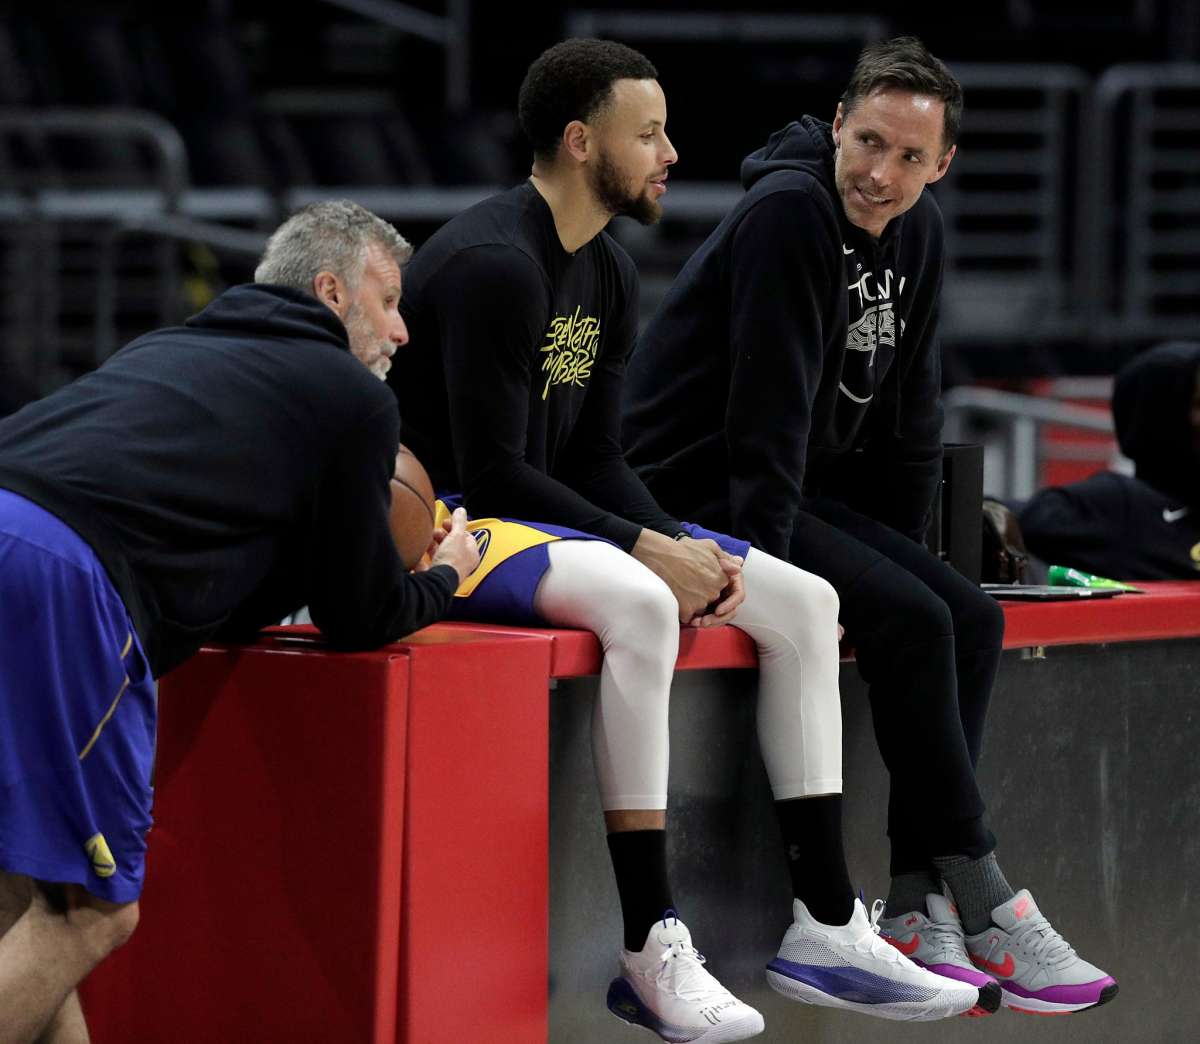 Steve Nash On Stephen Curry: "He Just Took His Game To Another Level Comparative To Everybody, Historically To Another Level... It's Kind Of Still Mind Boggling."